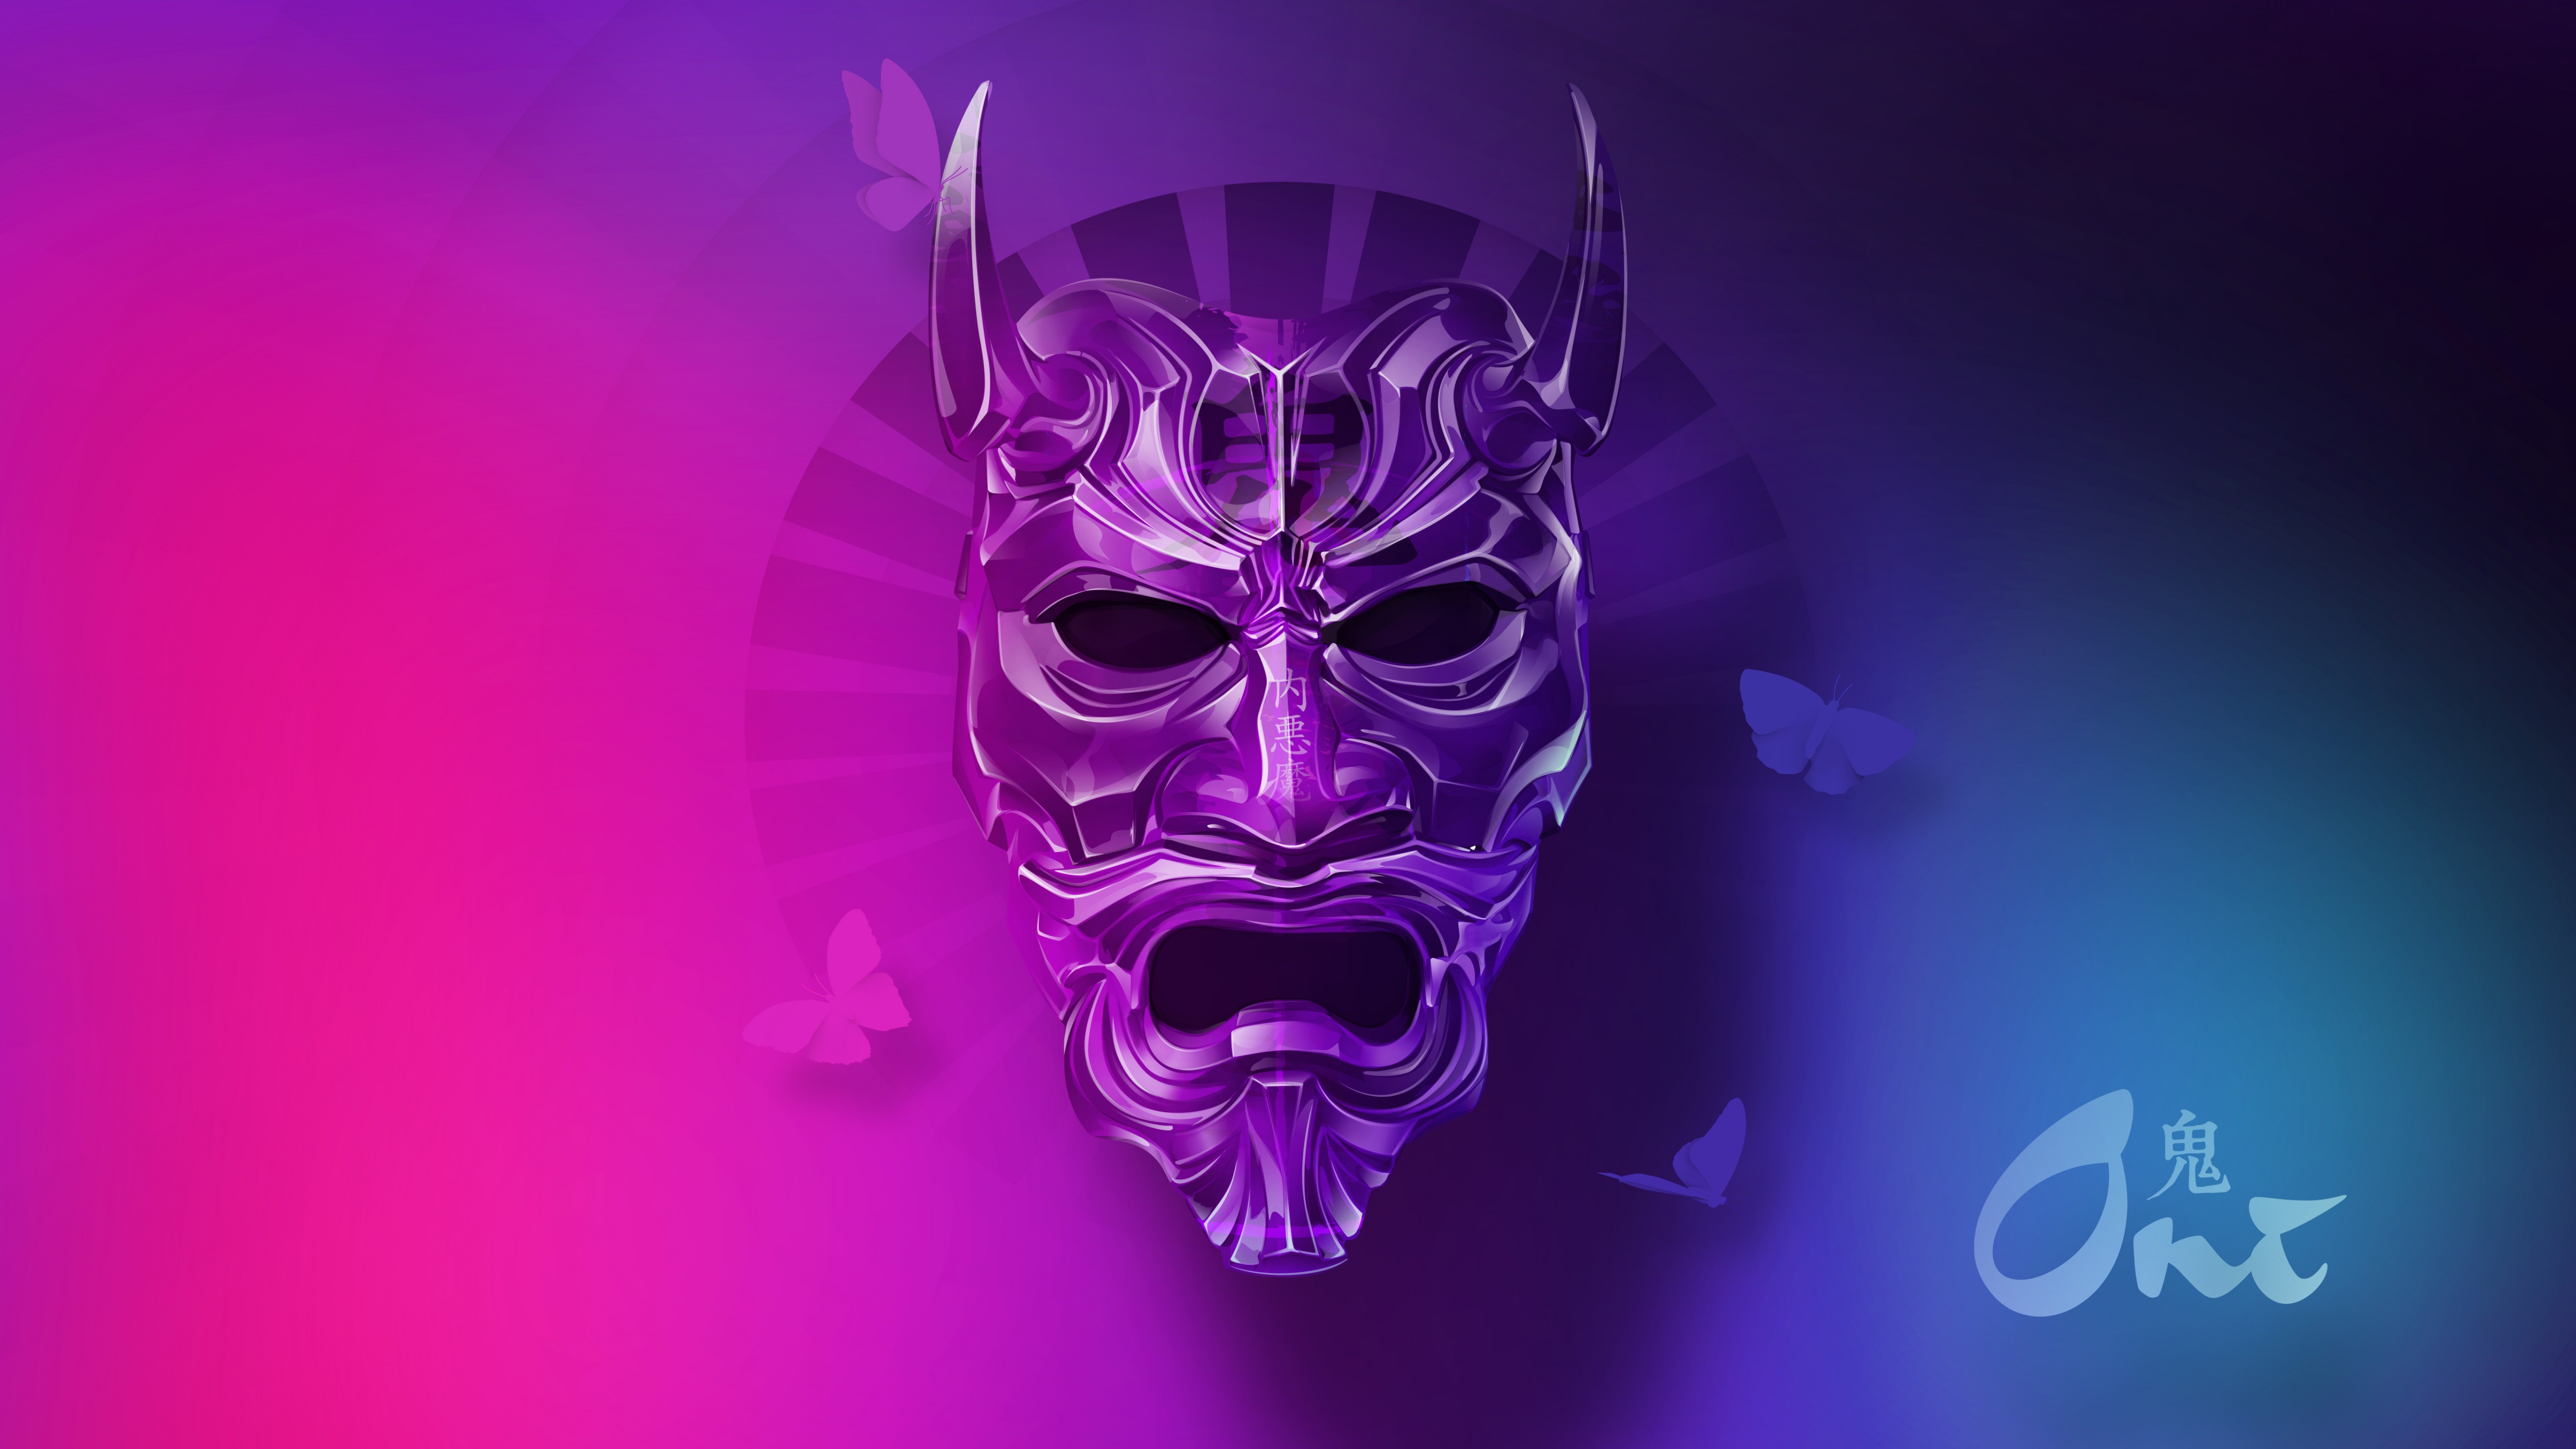 Artistic mask hd papers and backgrounds